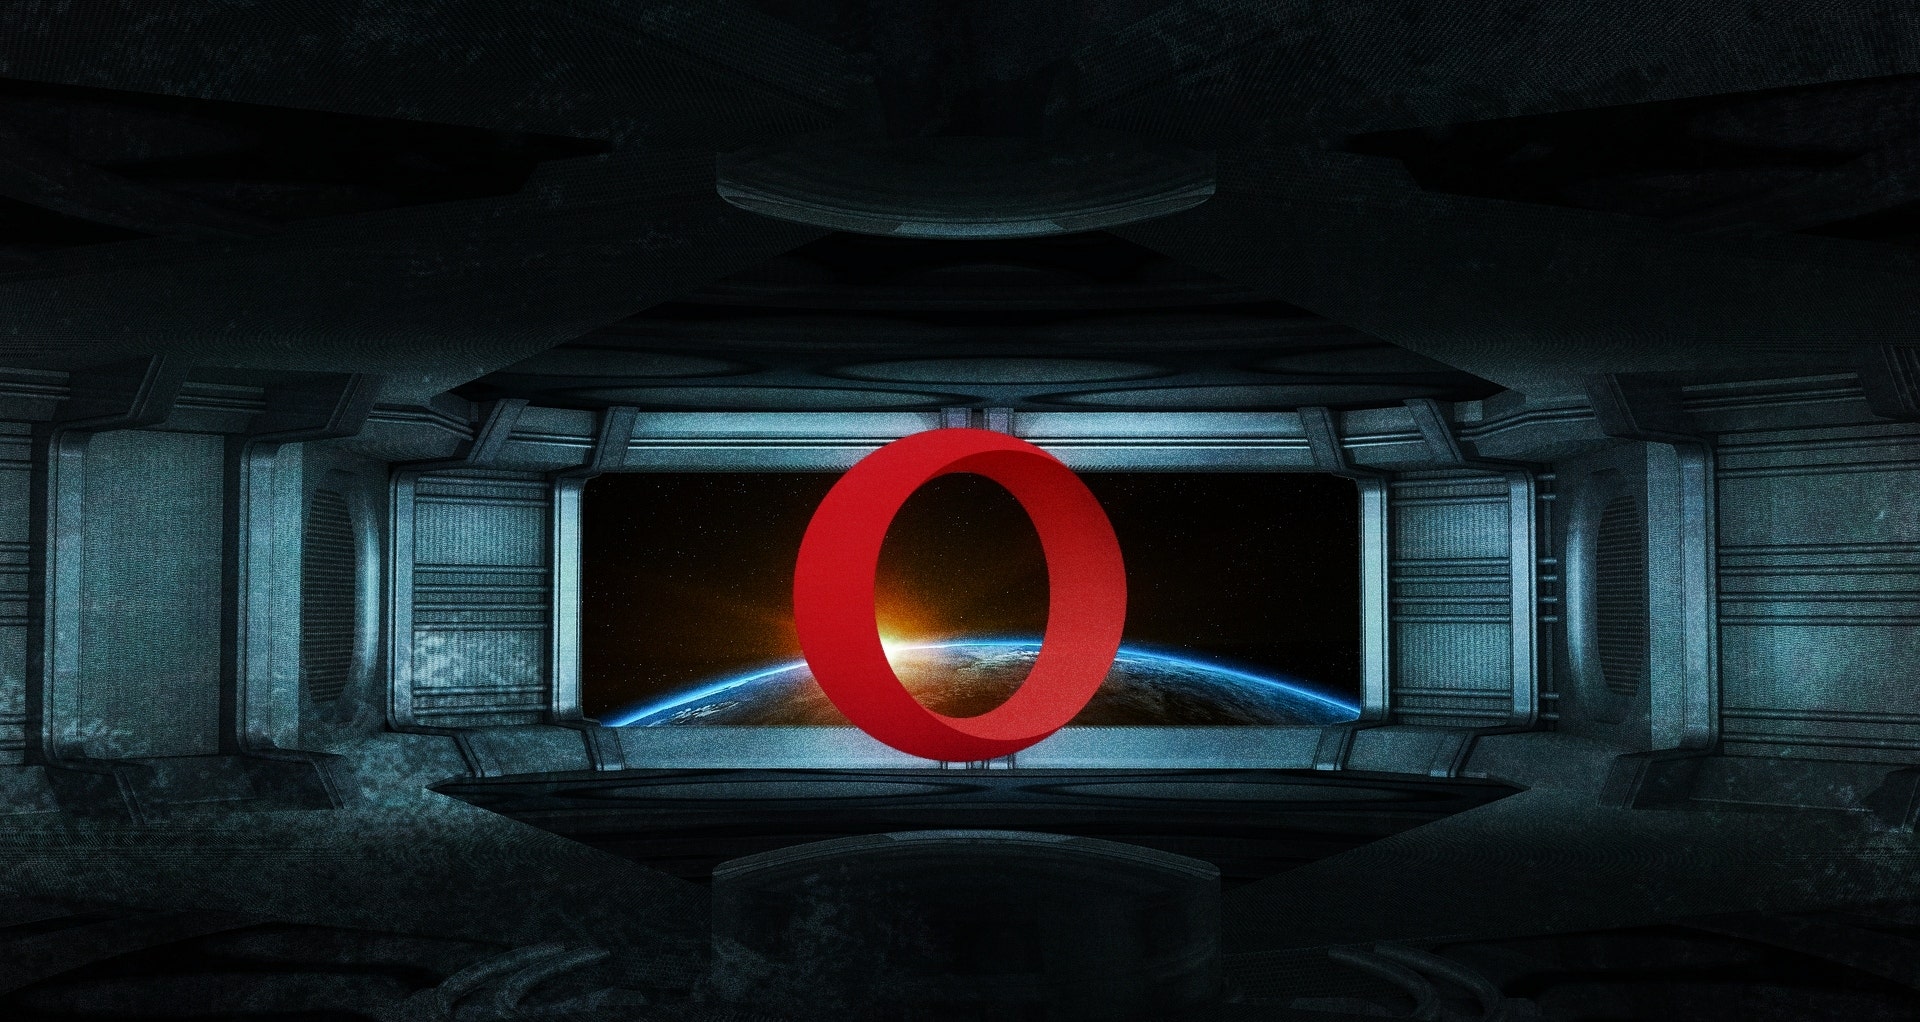 EXCLUSIVE: How Opera Is Building For Future Users With World's First Native Web3 Browser